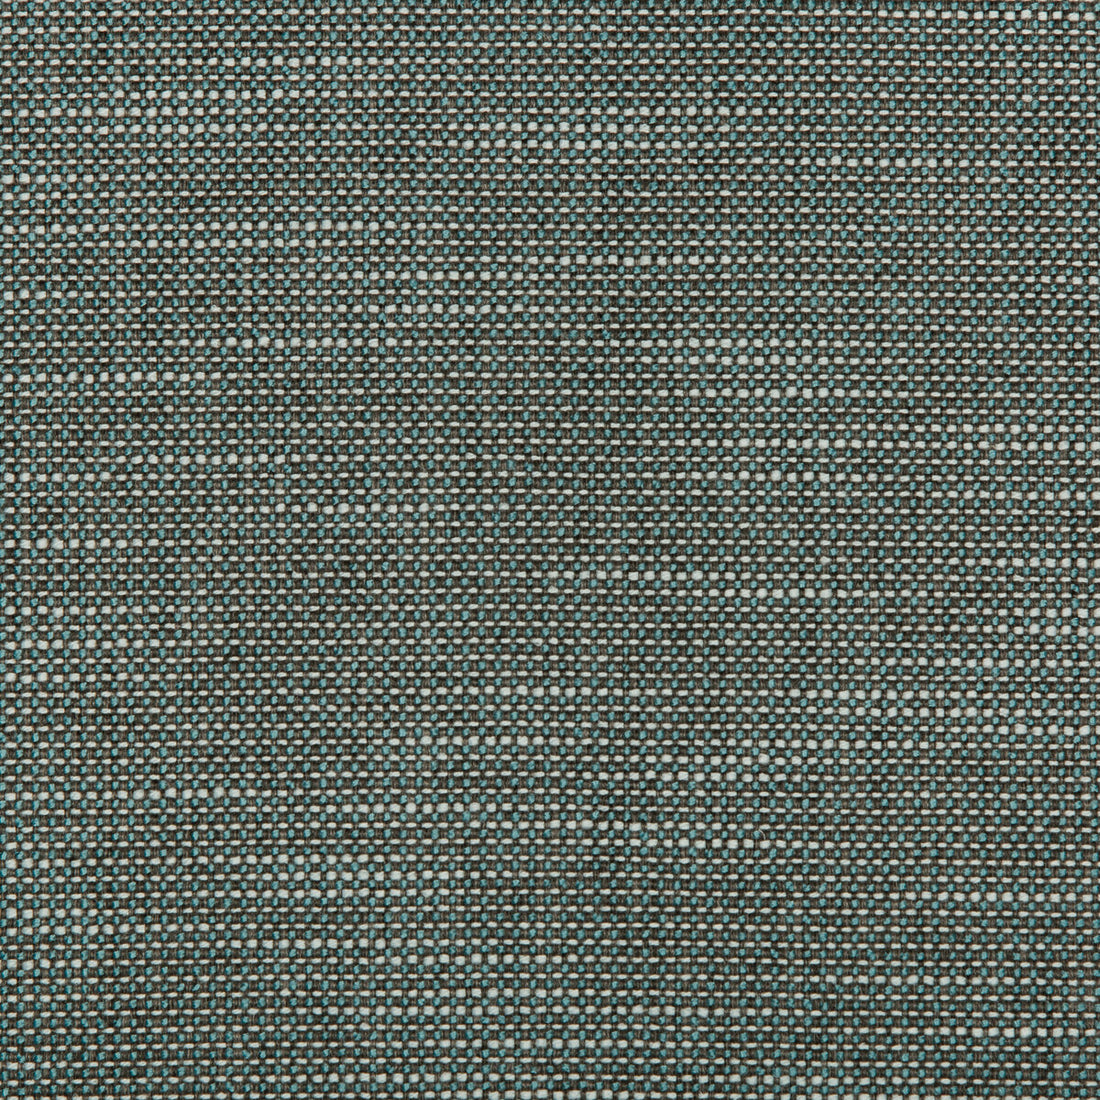 Heyward fabric in niagara color - pattern 35746.35.0 - by Kravet Contract in the Value Kravetarmor collection